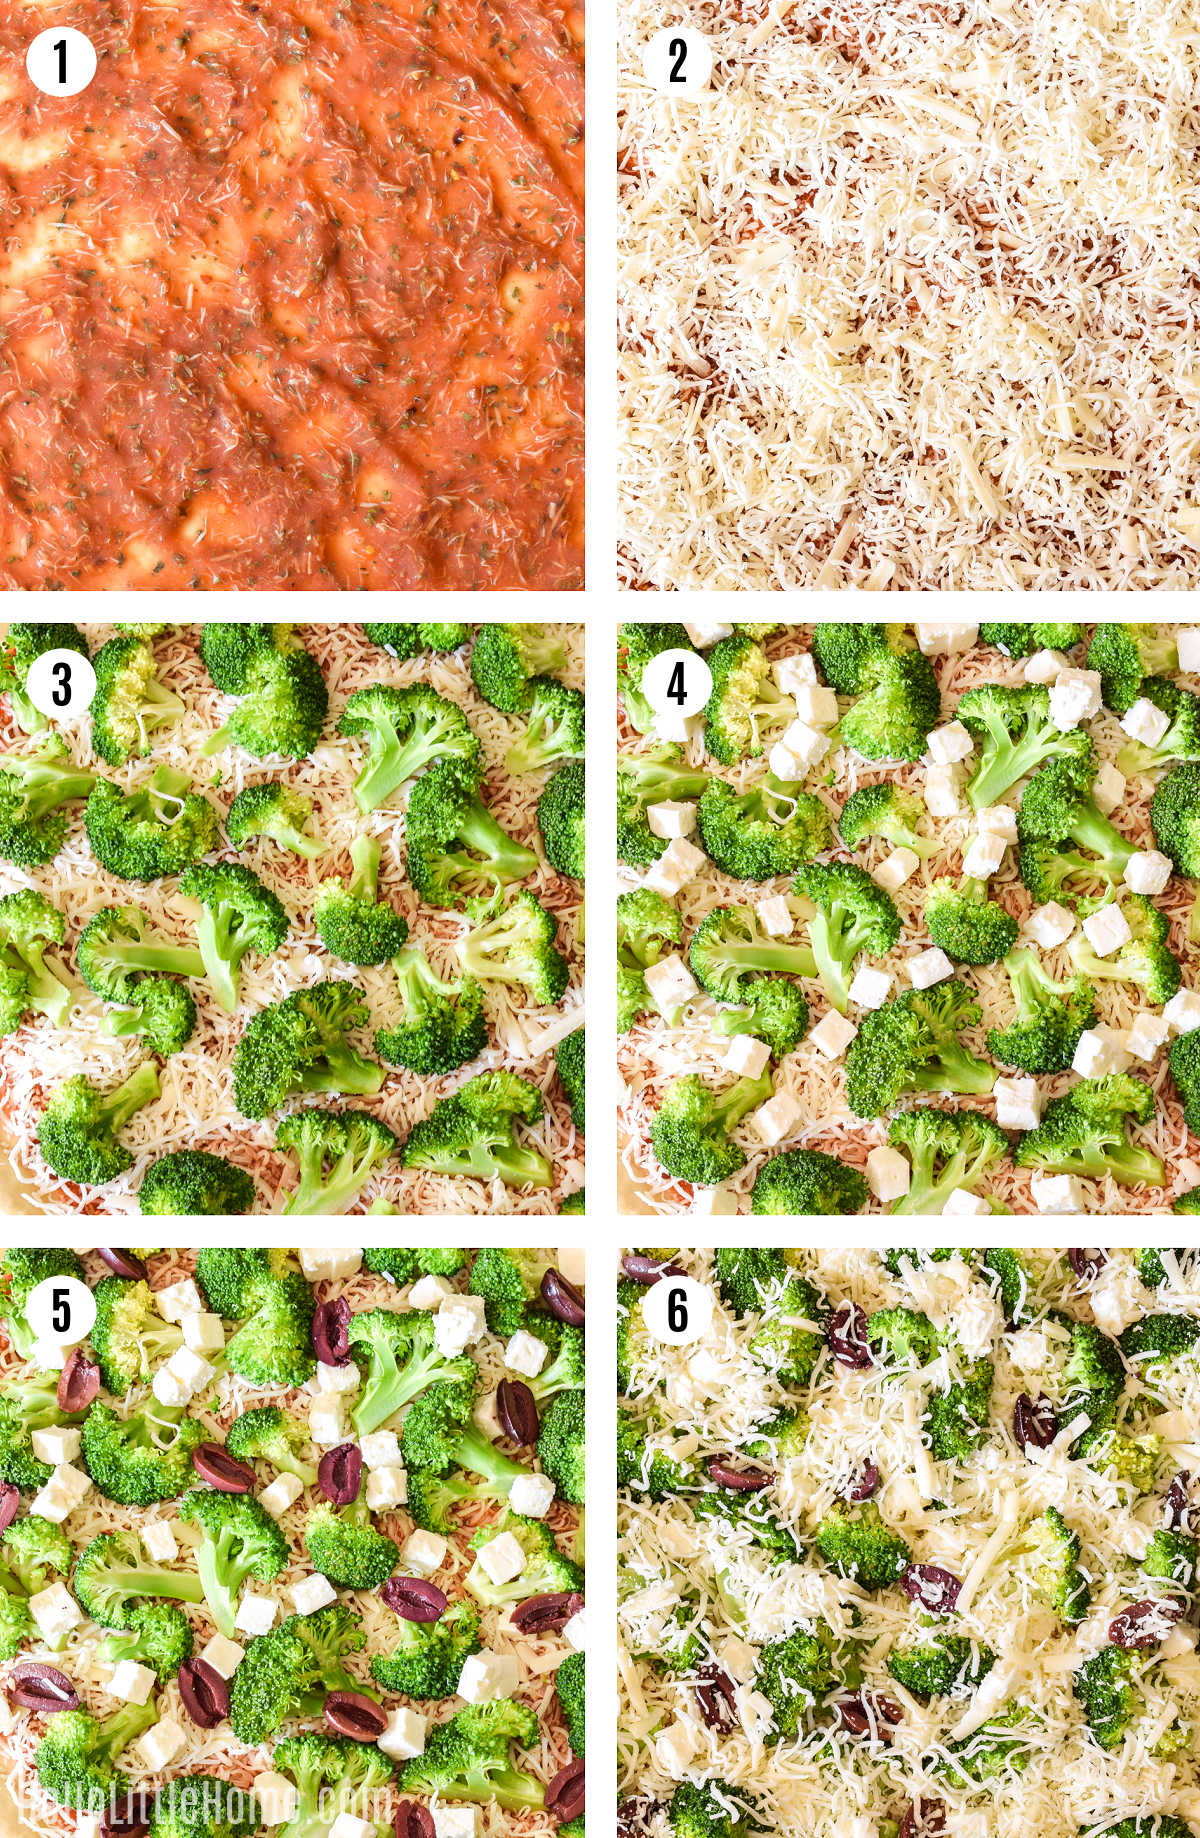 A photo collage showing how to make broccoli pizza step-by-step.